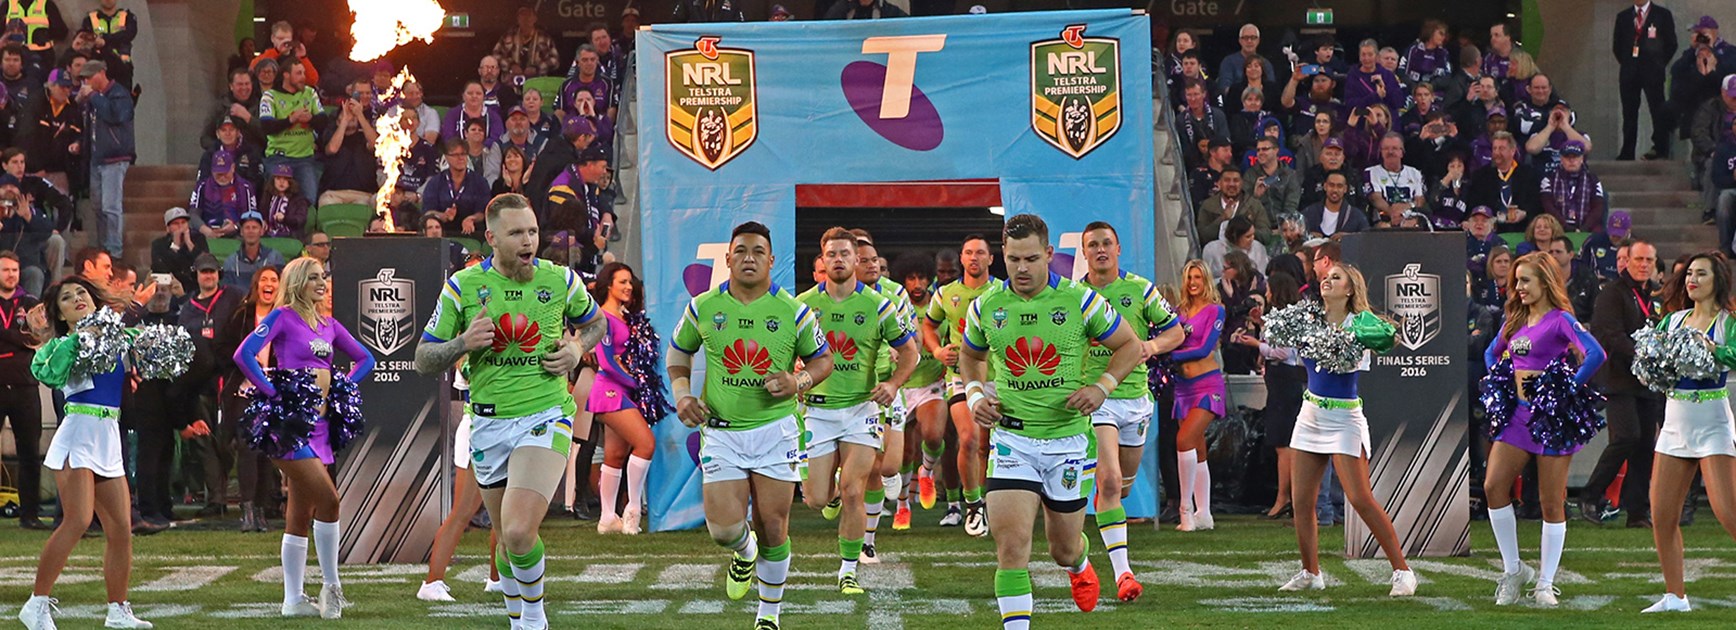 The Canberra Raiders run out on to AAMI Park to face the Storm in a preliminary final.